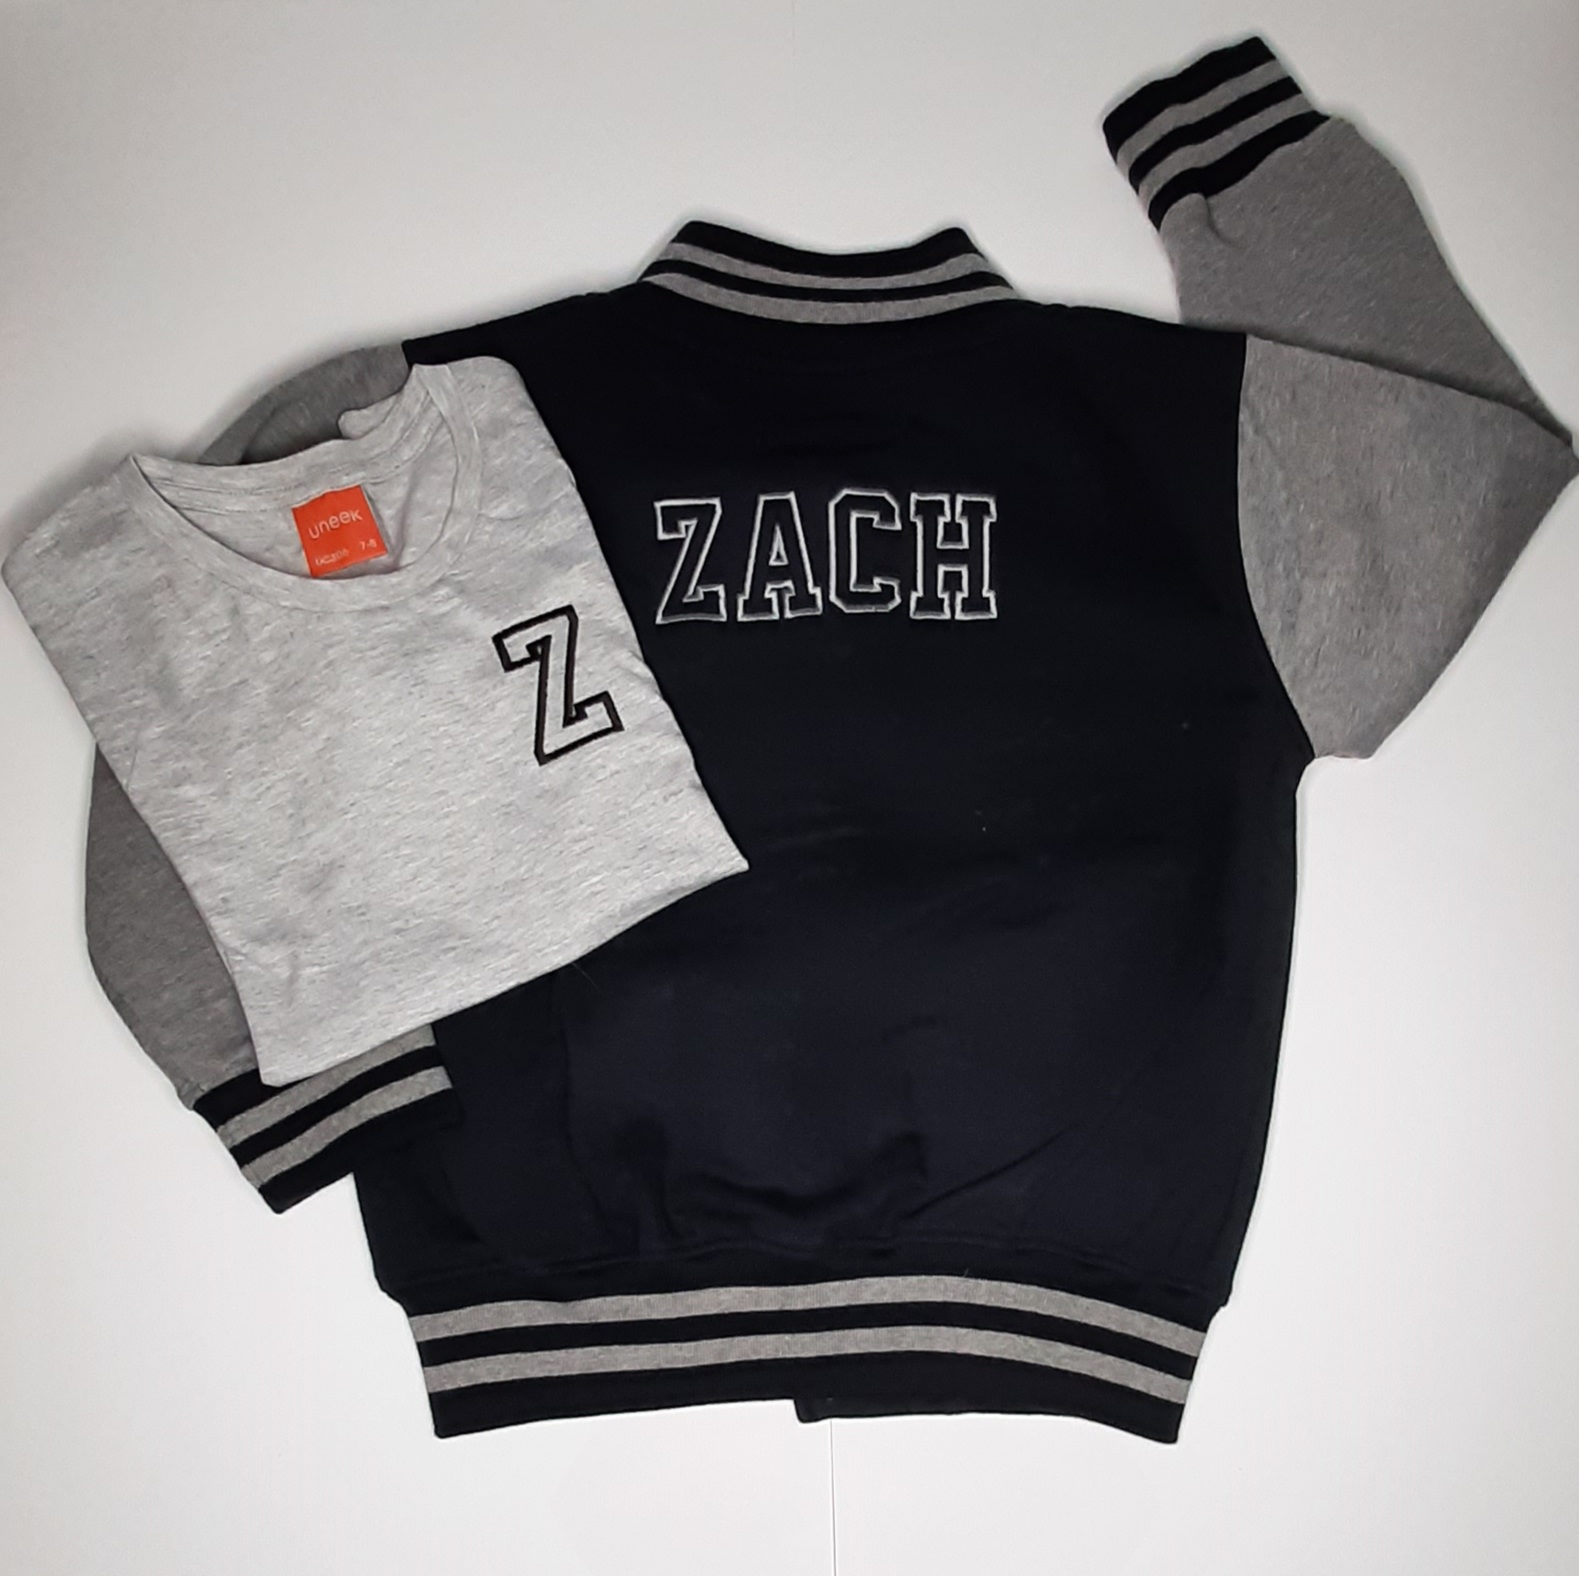 Children's varsity jacket on model in black and grey with embroidered name with matching t shirt